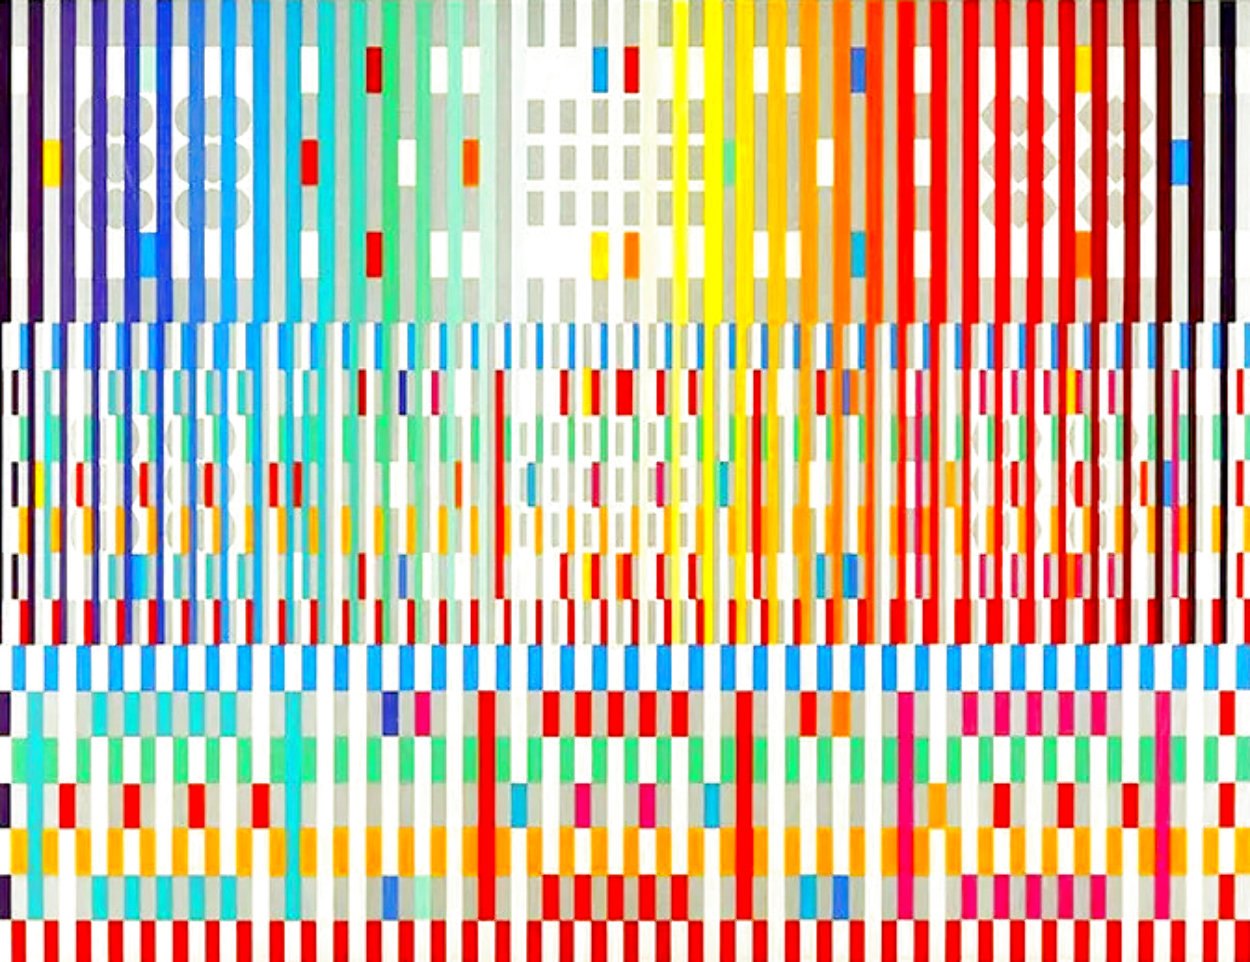 Blessing 1980 HS - Huge Limited Edition Print by Yaacov Agam